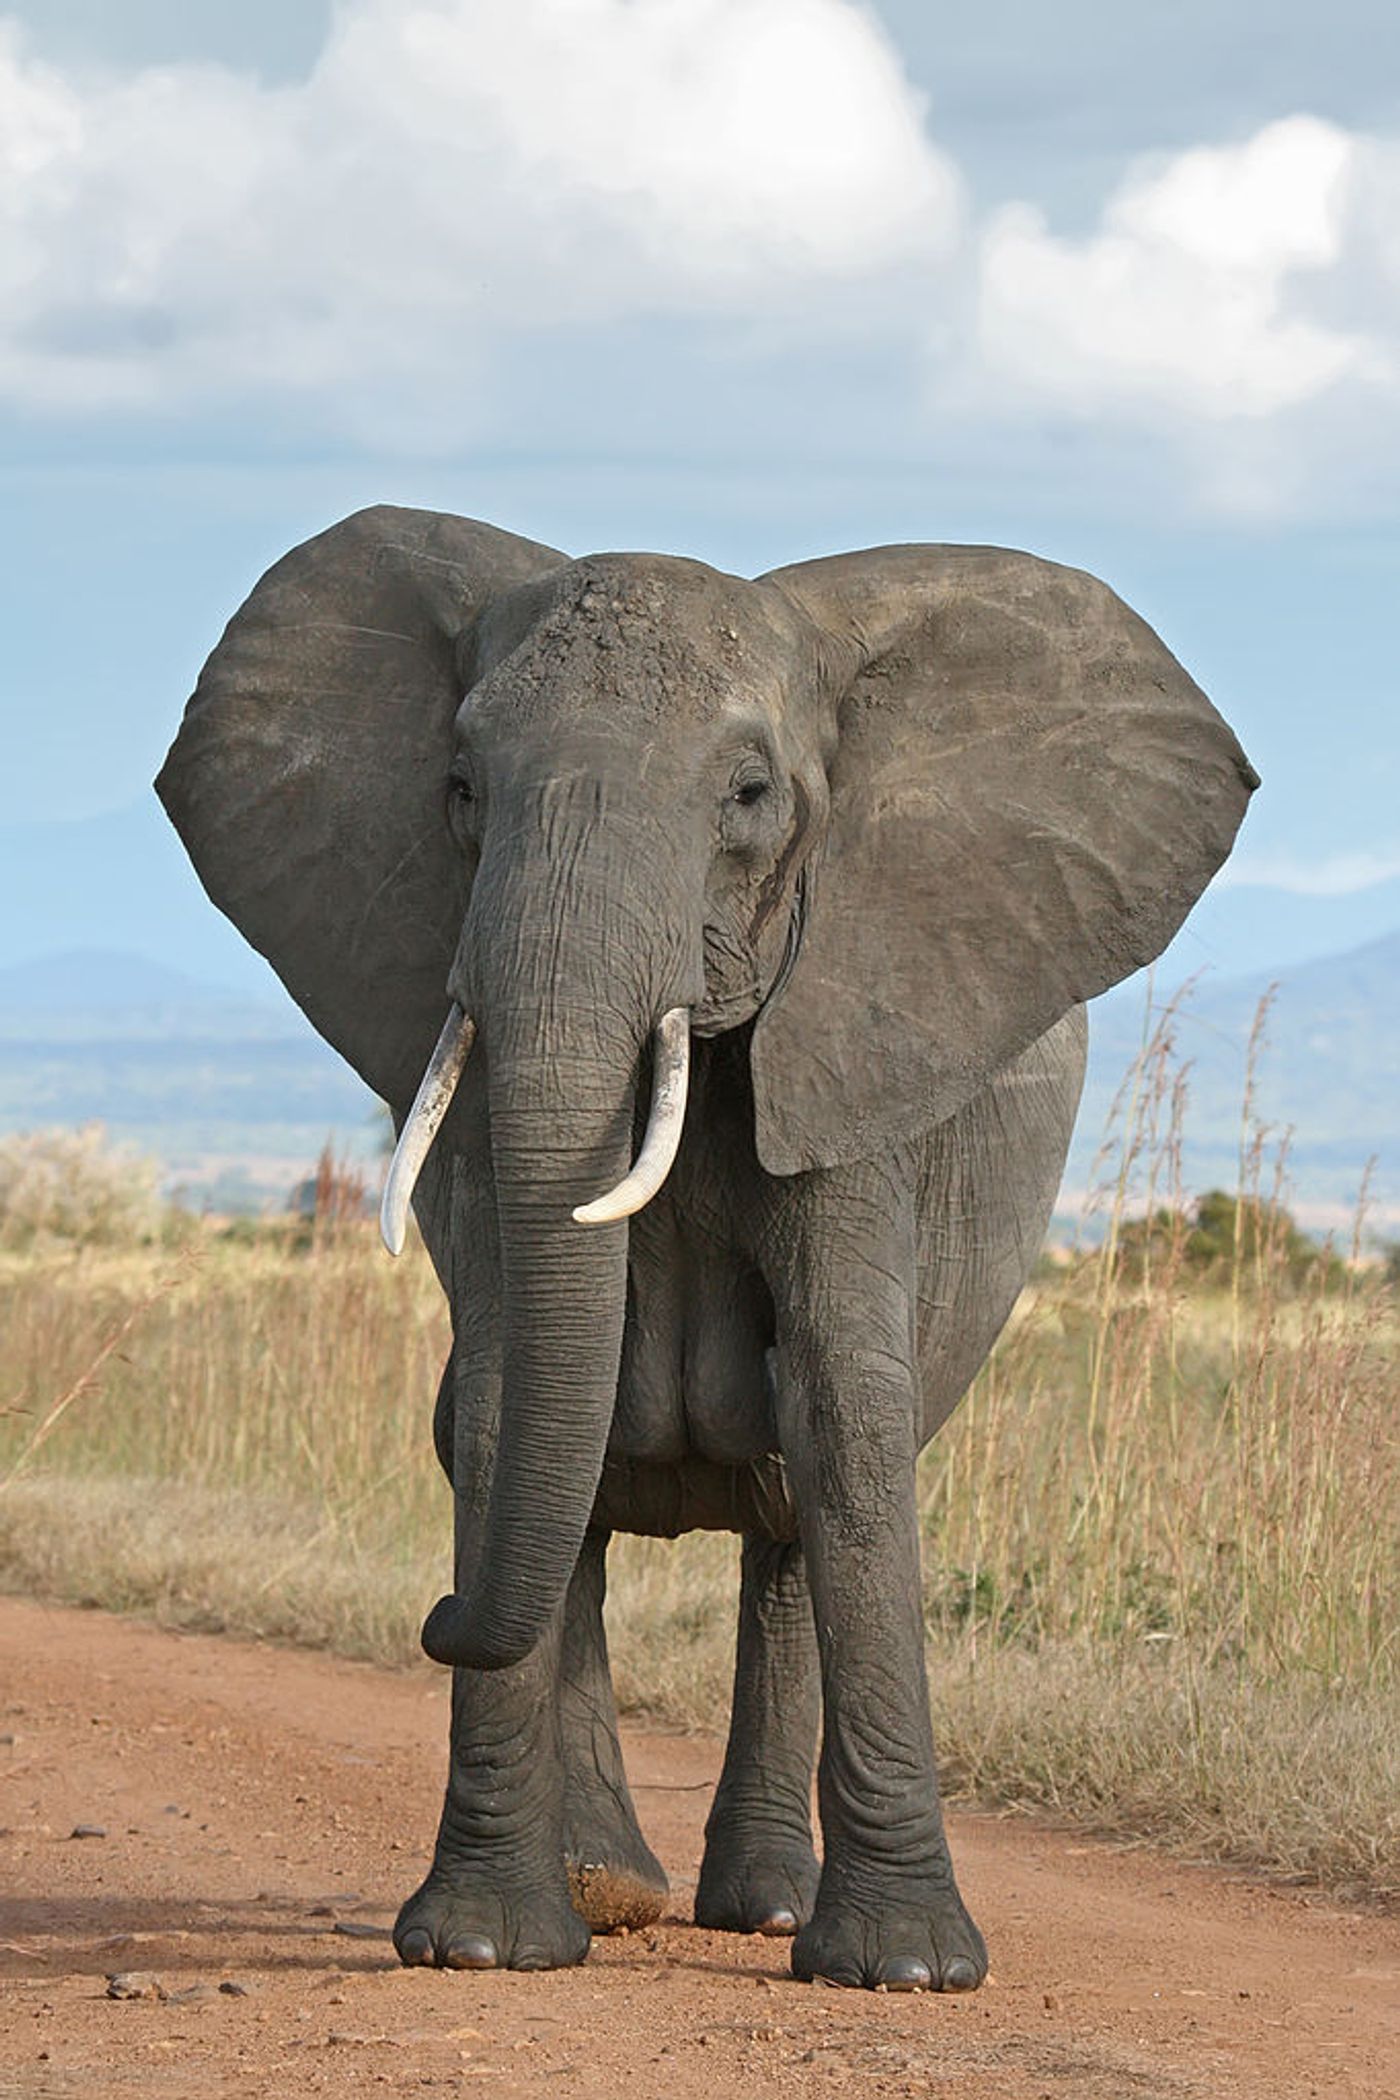 Elephants in Africa are disappearing at an alarming rate from poachers